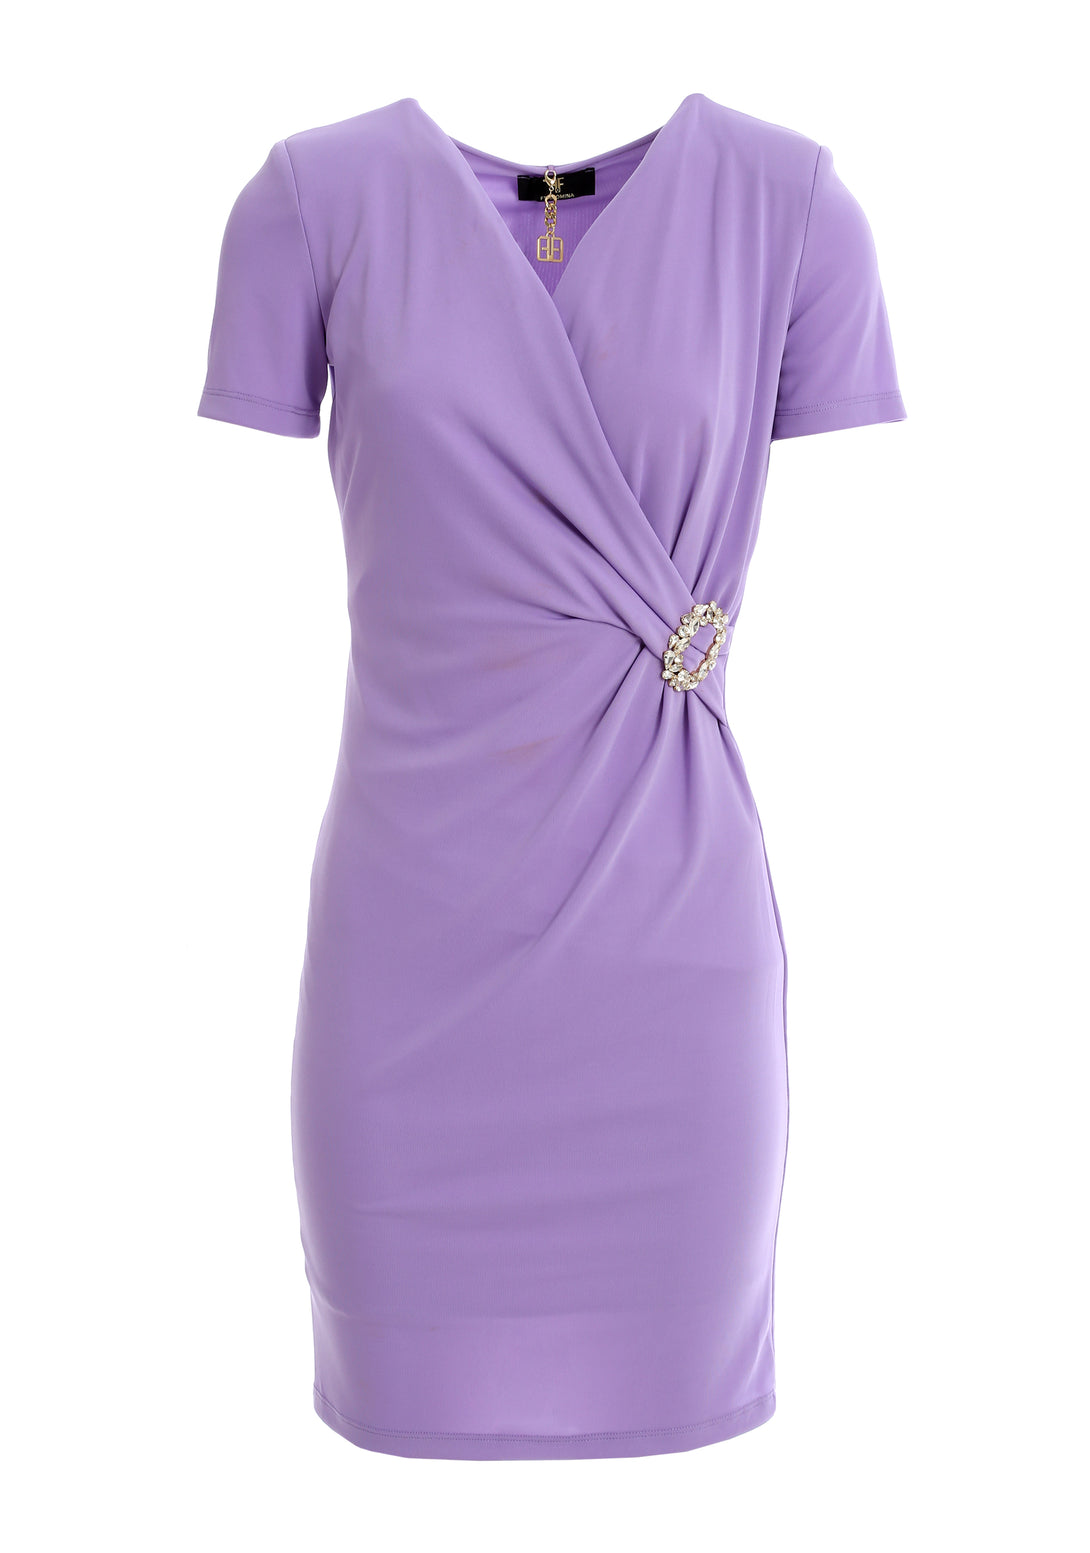 Mini dress slim fit made with technical fabric